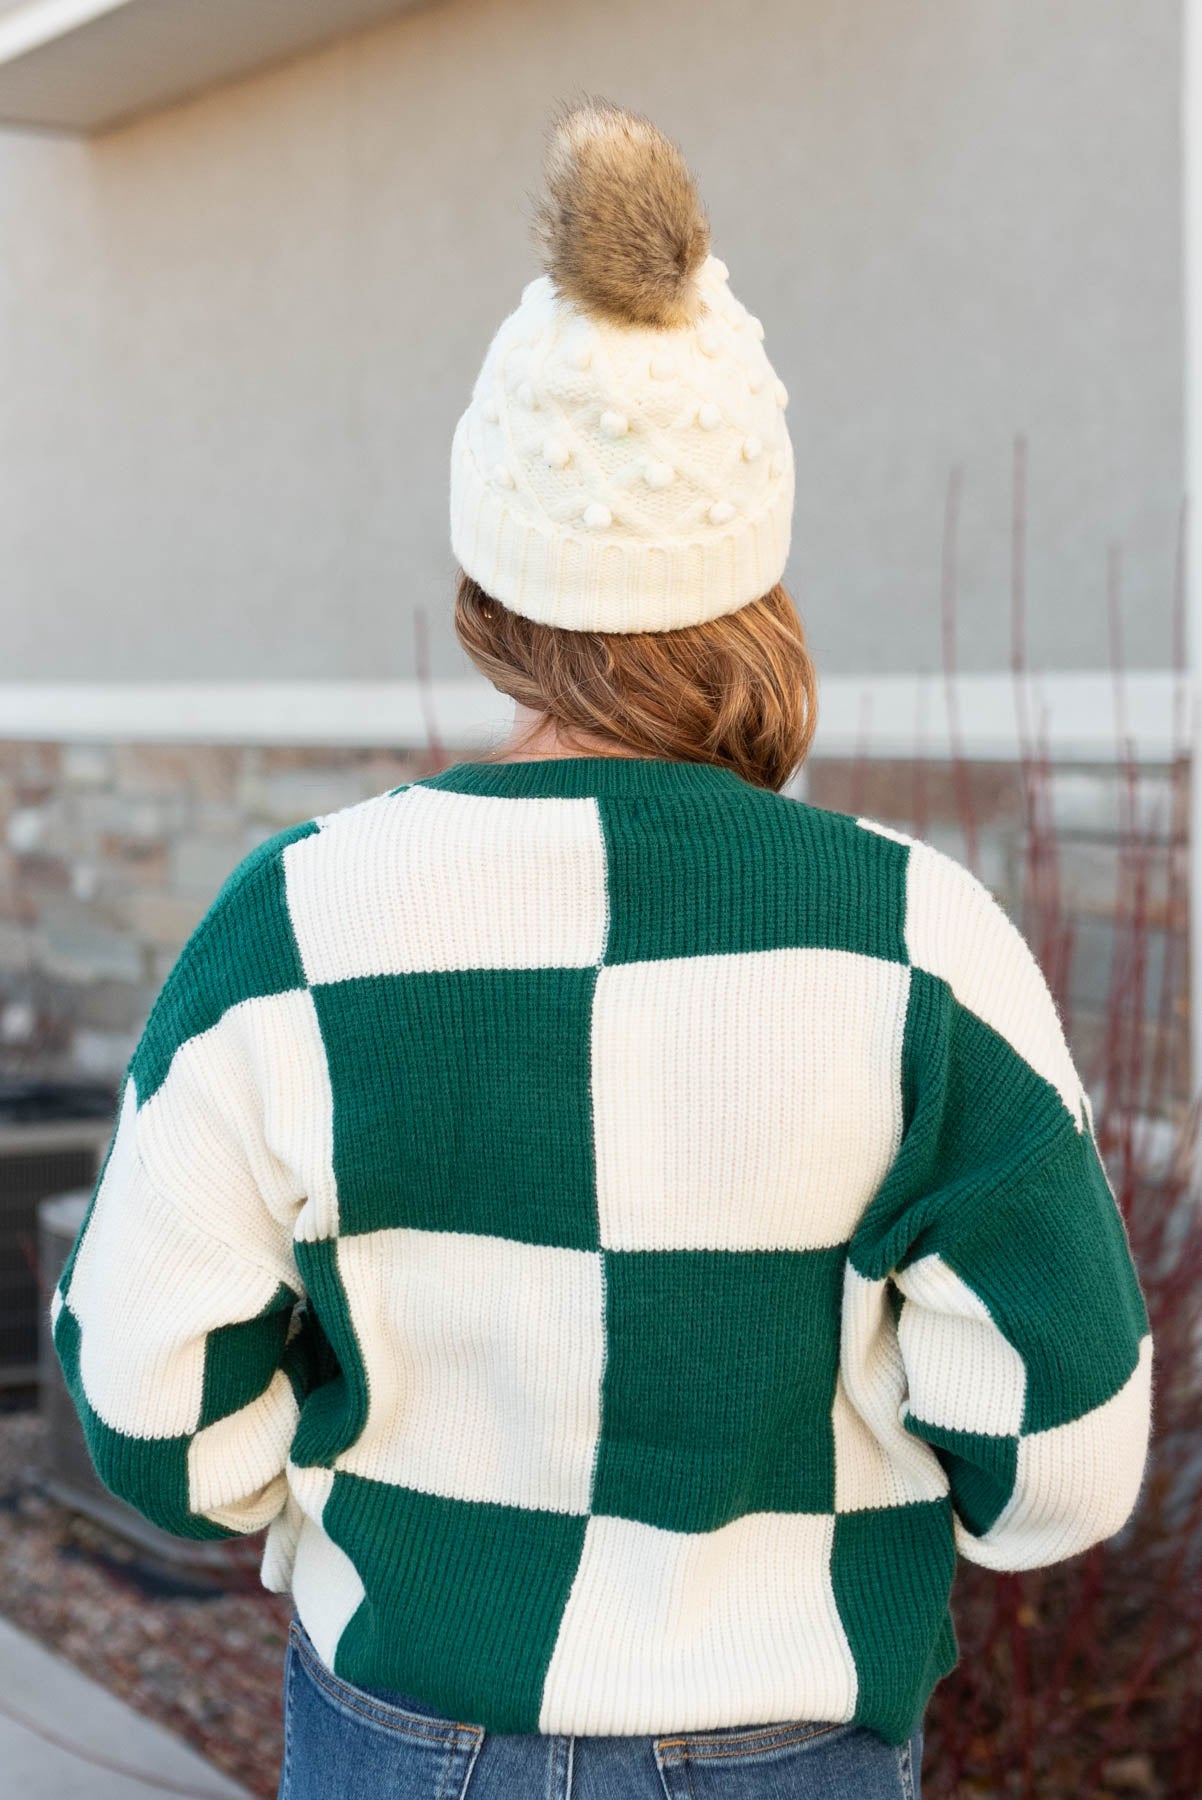 Back view of a hunter green sweater